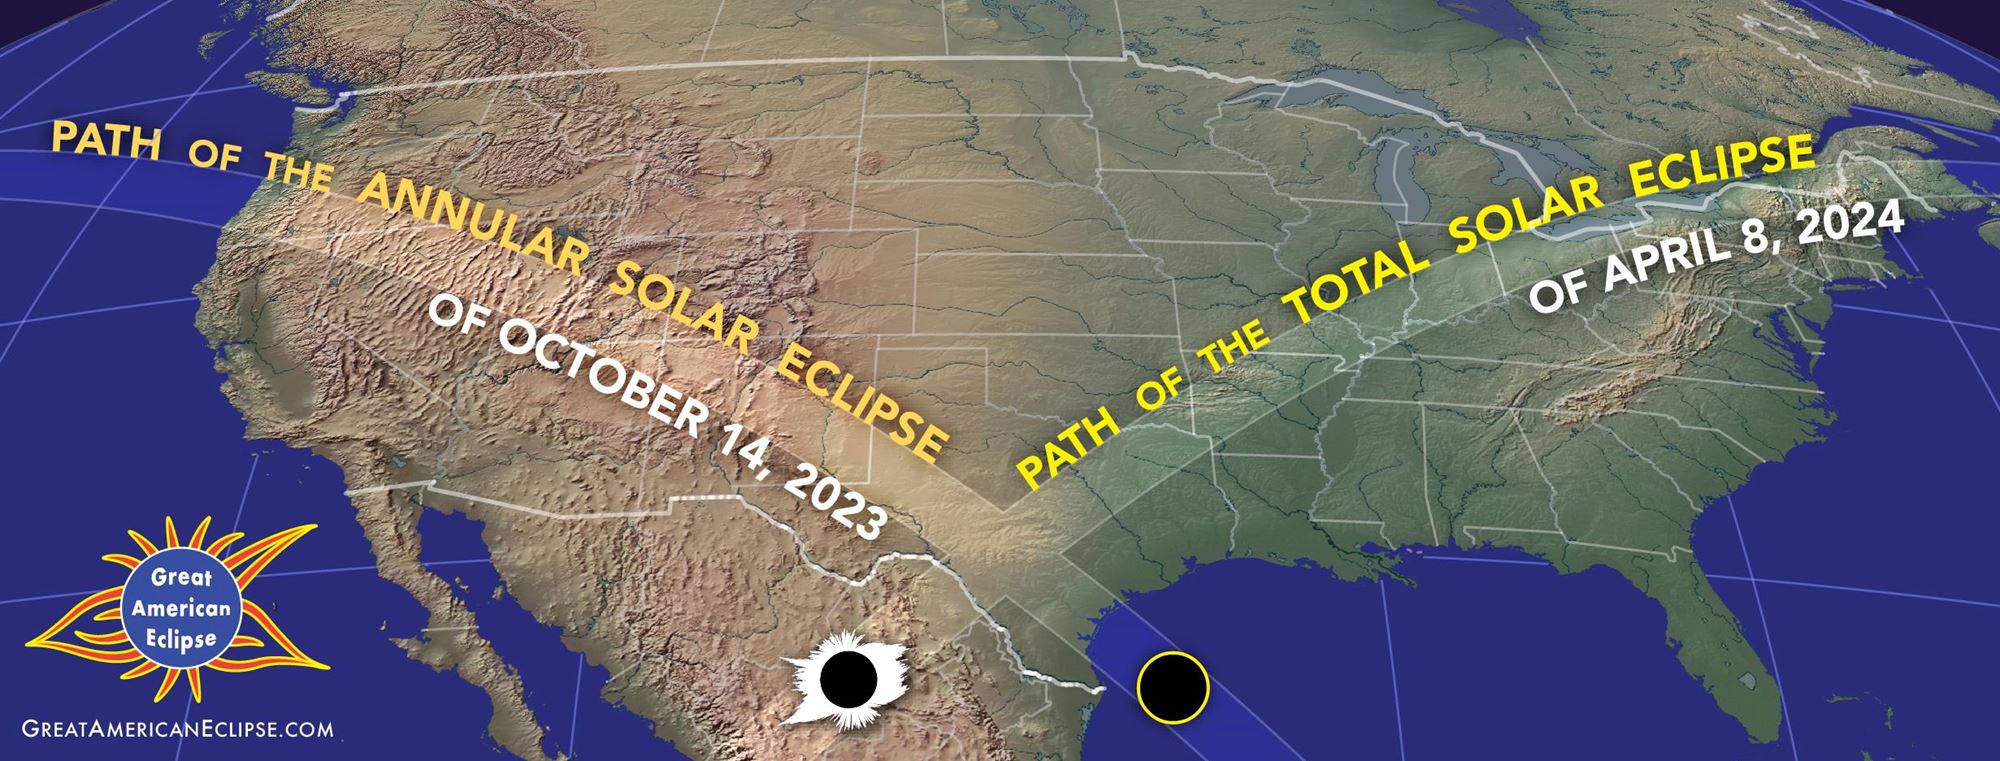 Kerrville, TX, 2024 Total Solar Eclipse: Viewing, Events